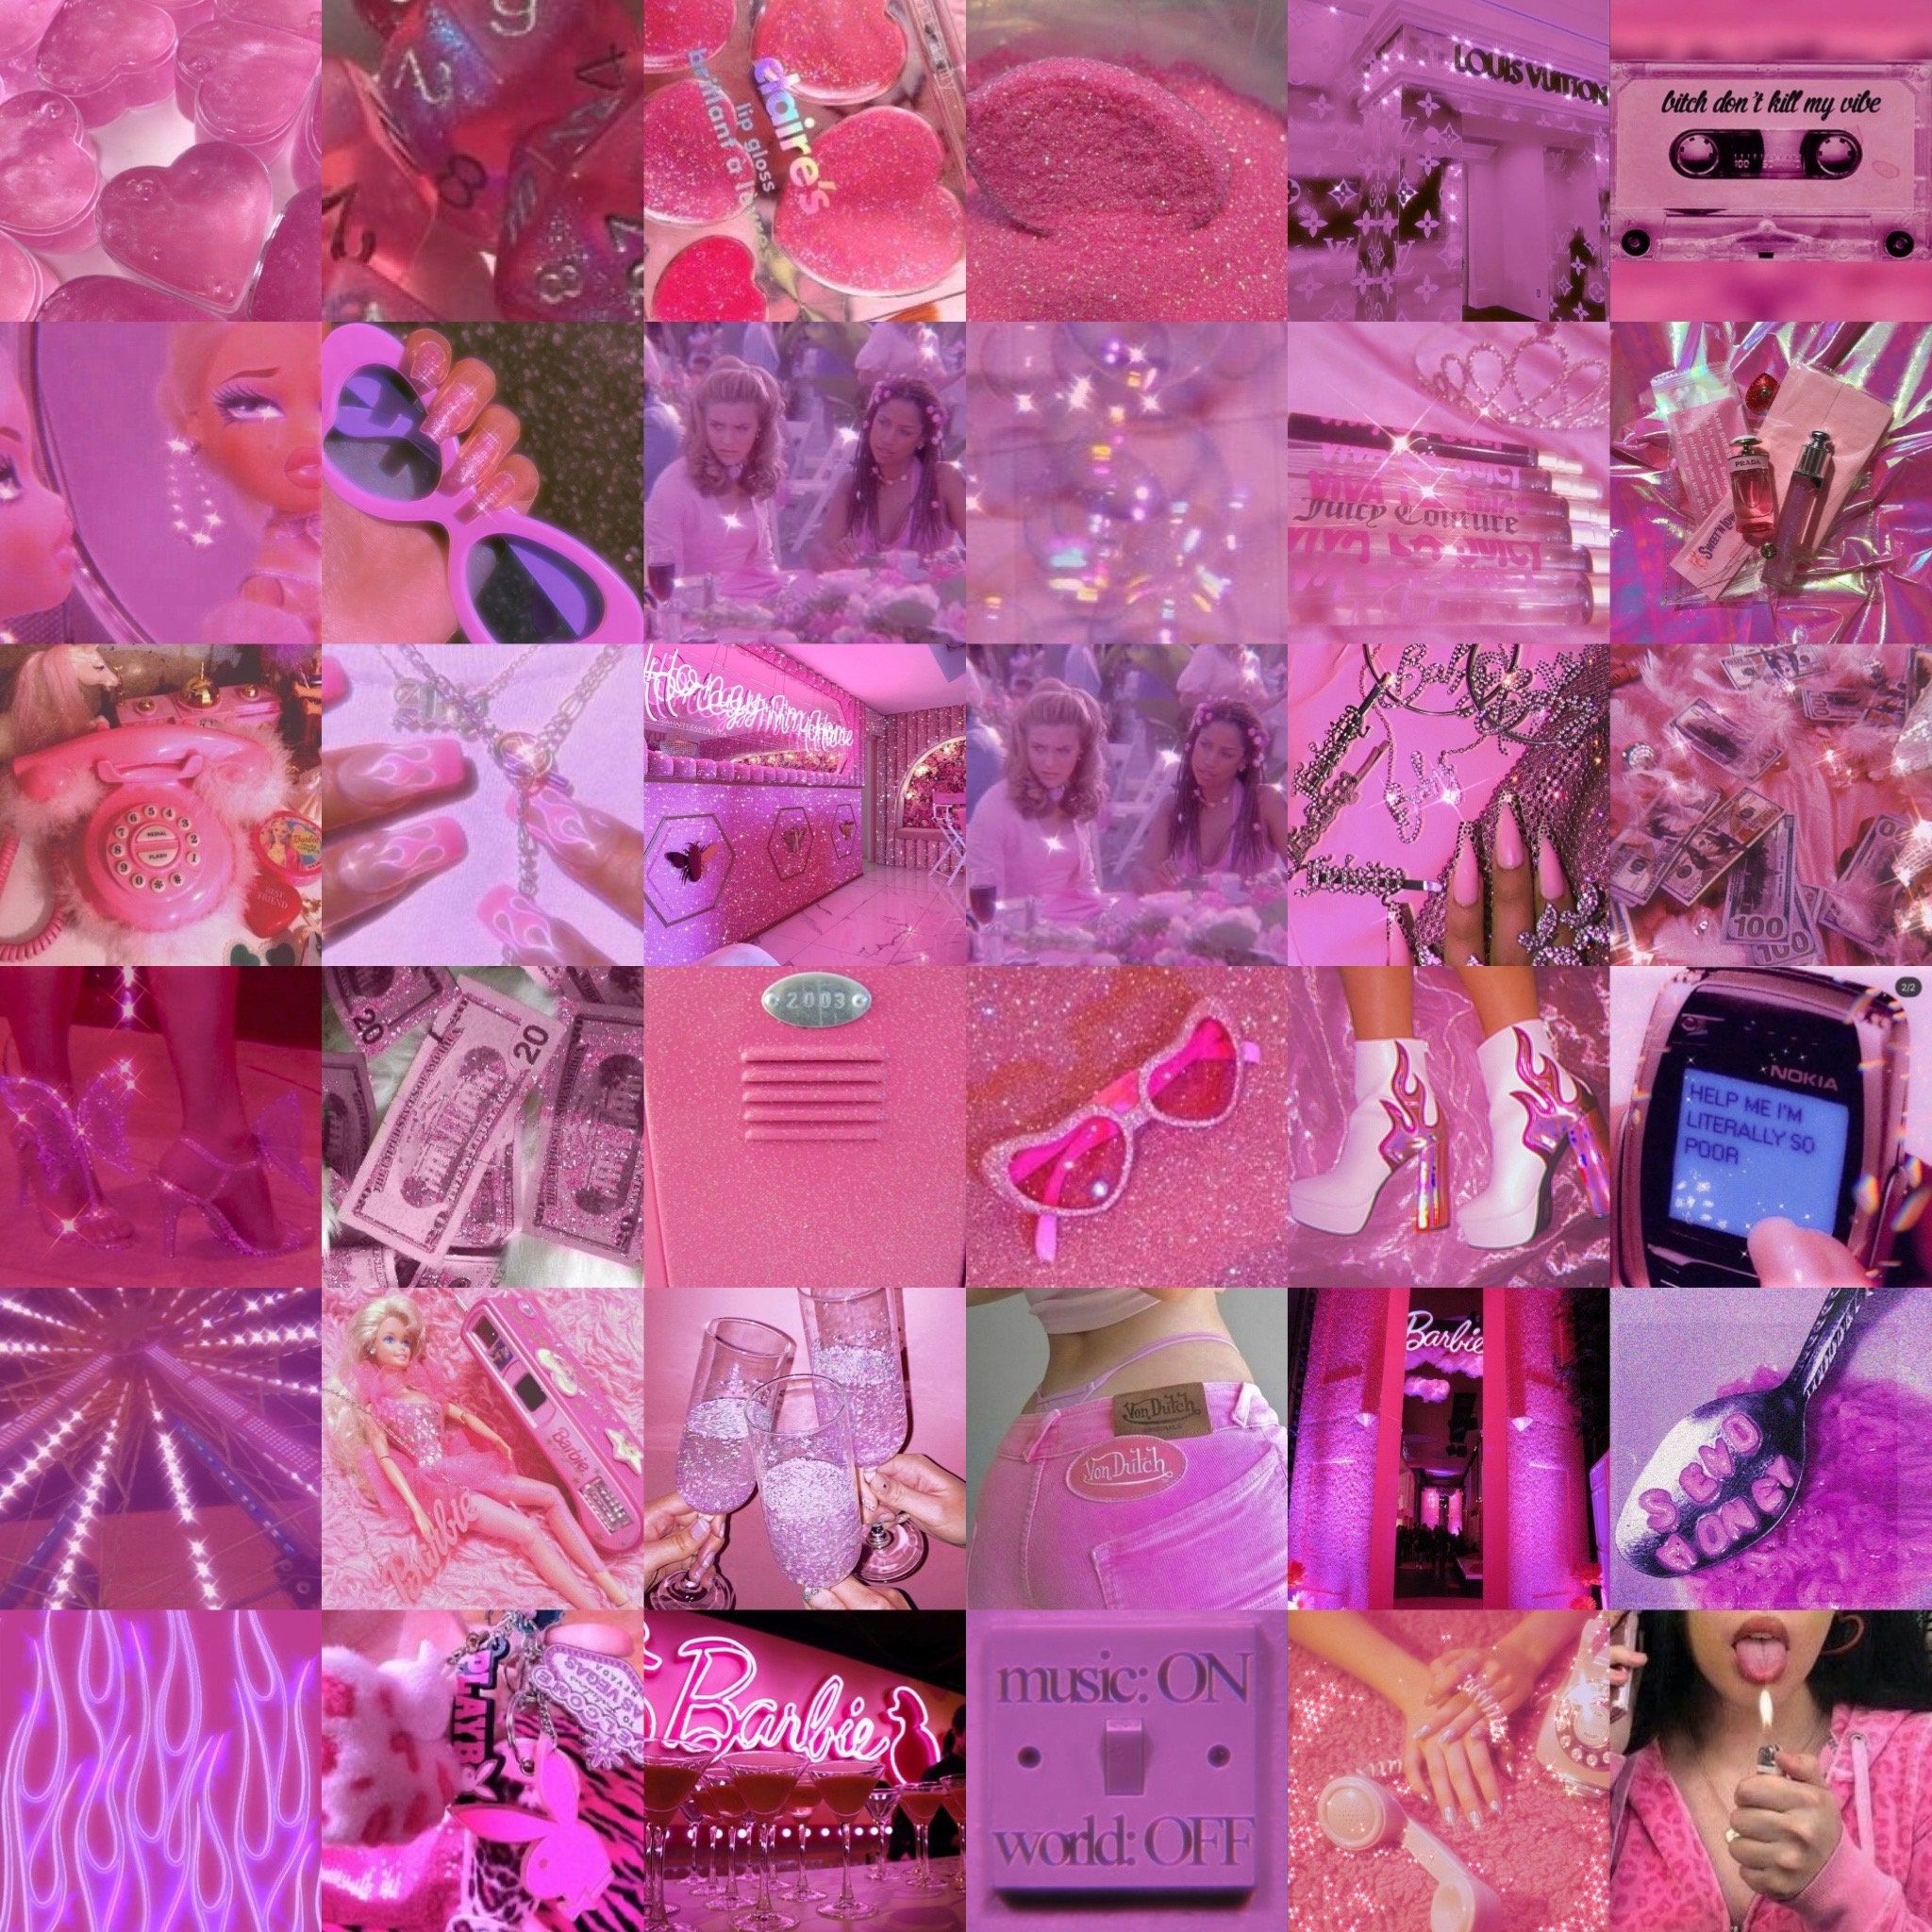 A collage of pink pictures with different items - 2000s, Y2K